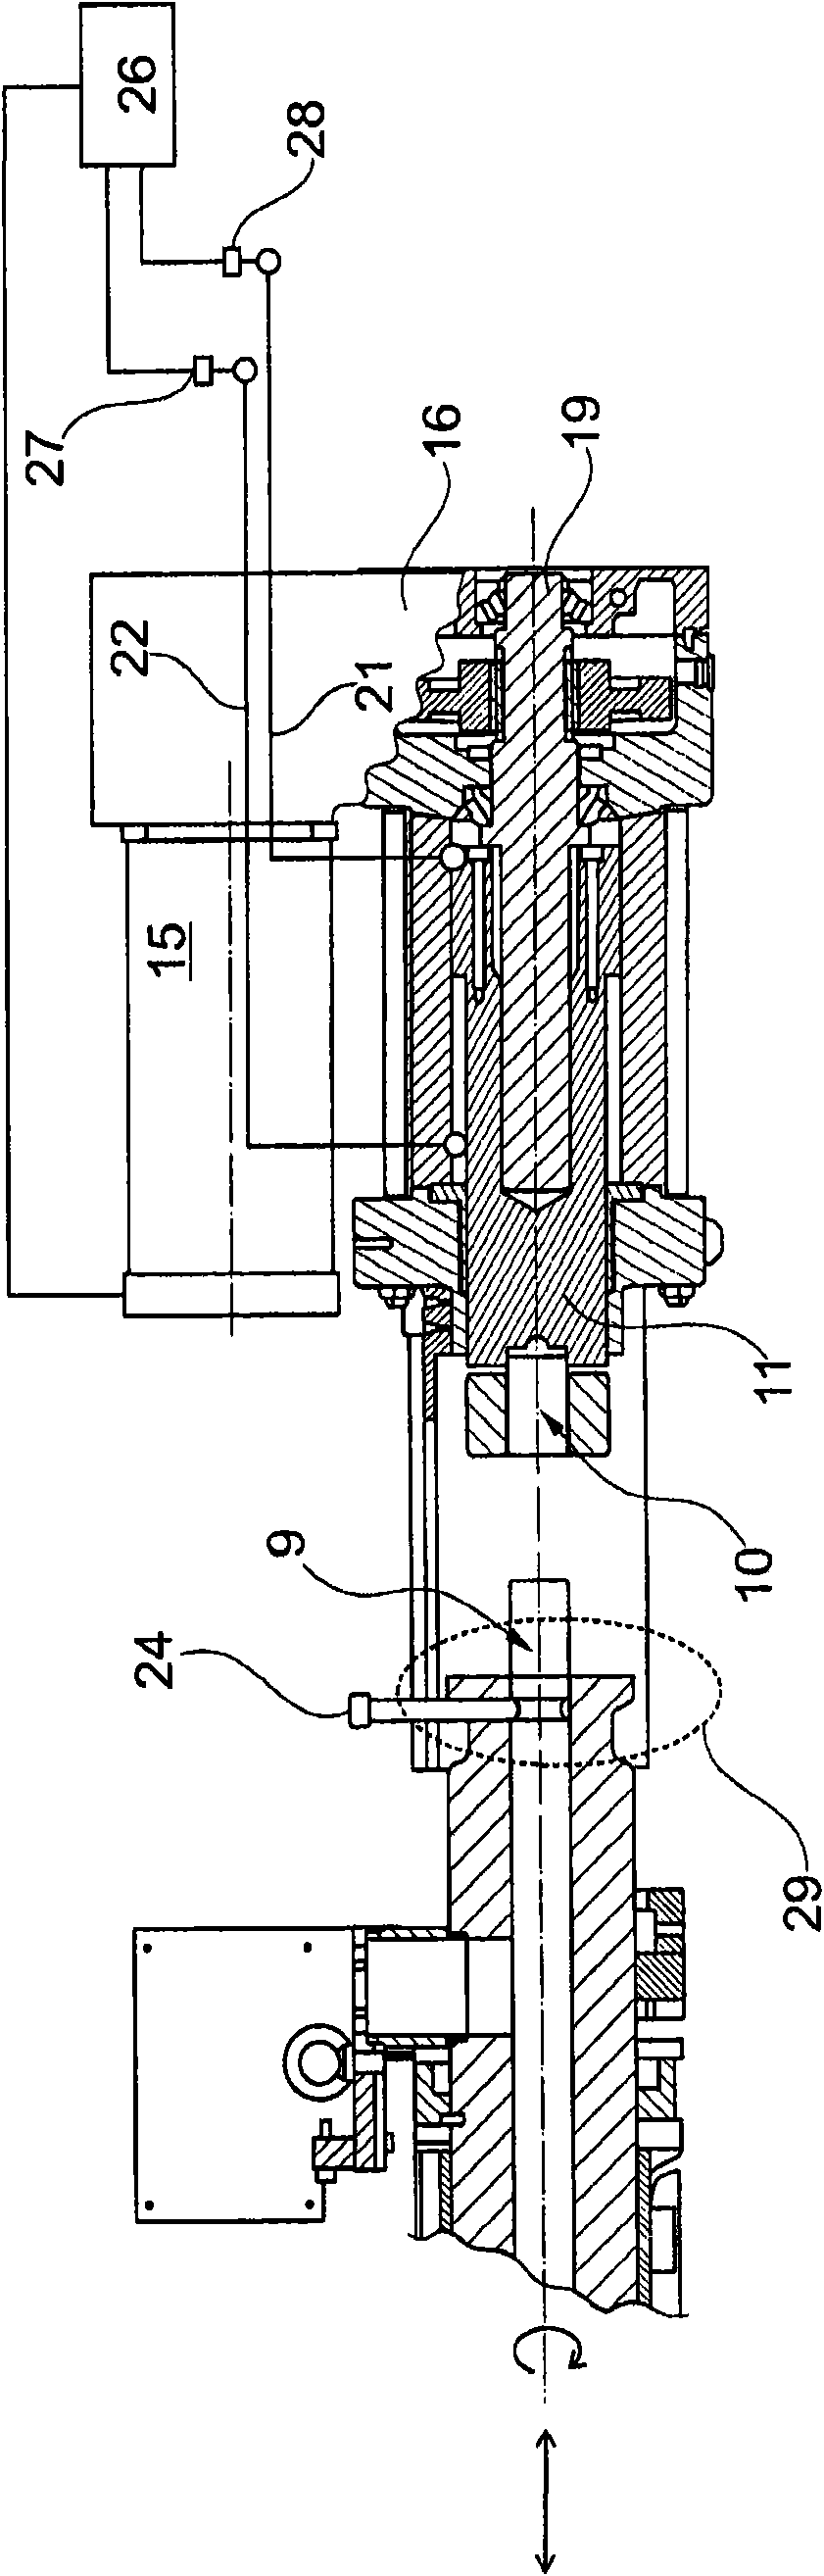 Method and device for the assembly and disassembly of a preplasticizing spindle